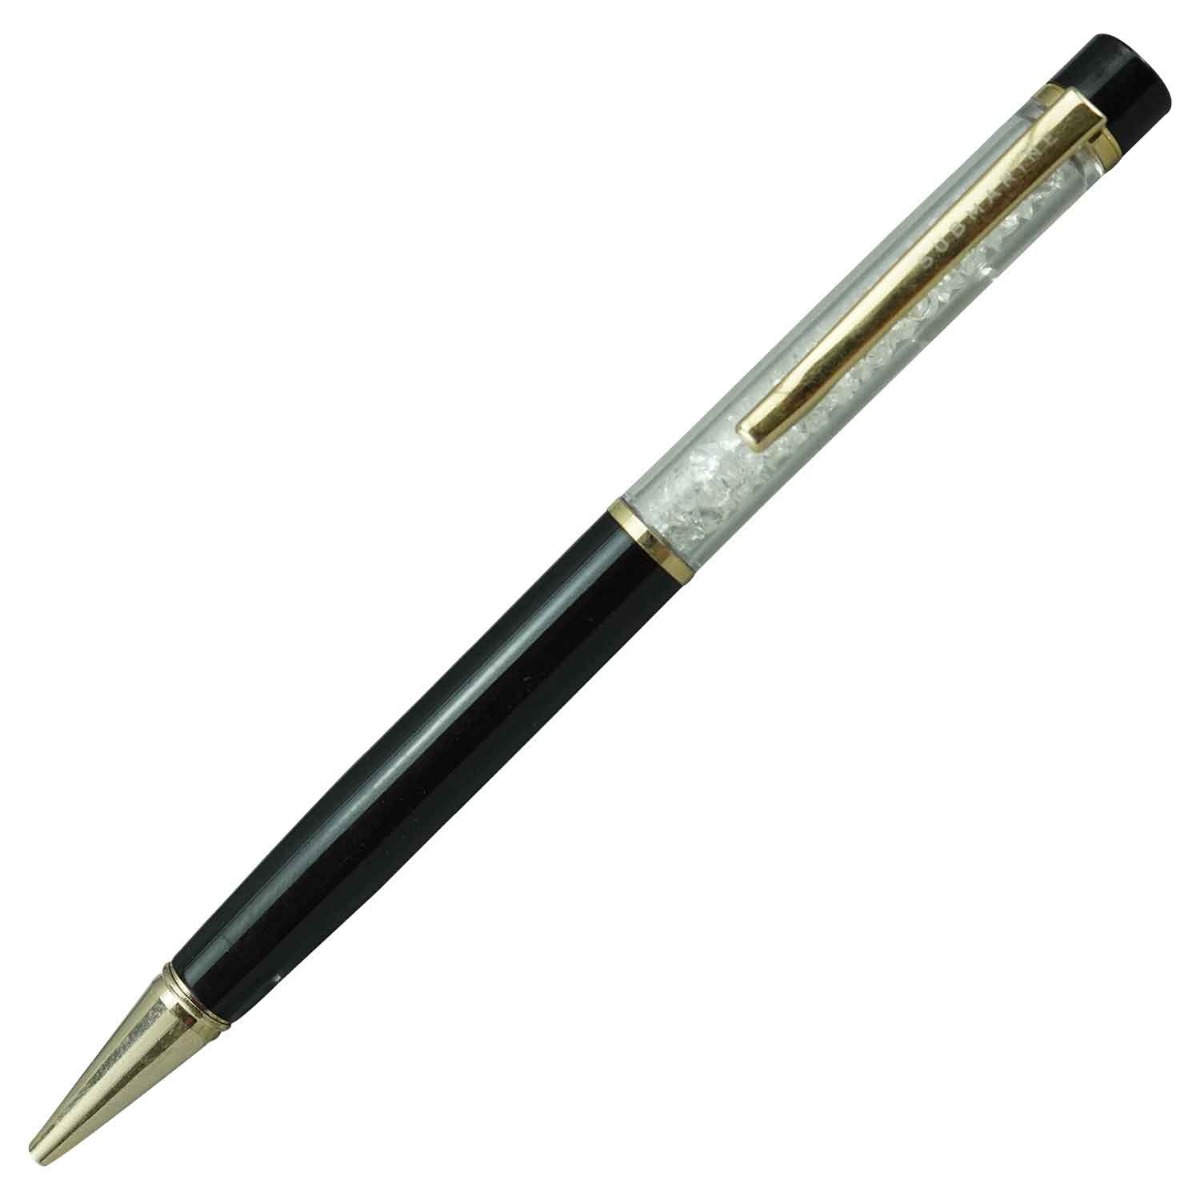 Submarine  829  Model:15957  Glossy  Finish Black Color Body  With White Color Crystal Filled Head  Fine Tip Twist Type Ball Pen